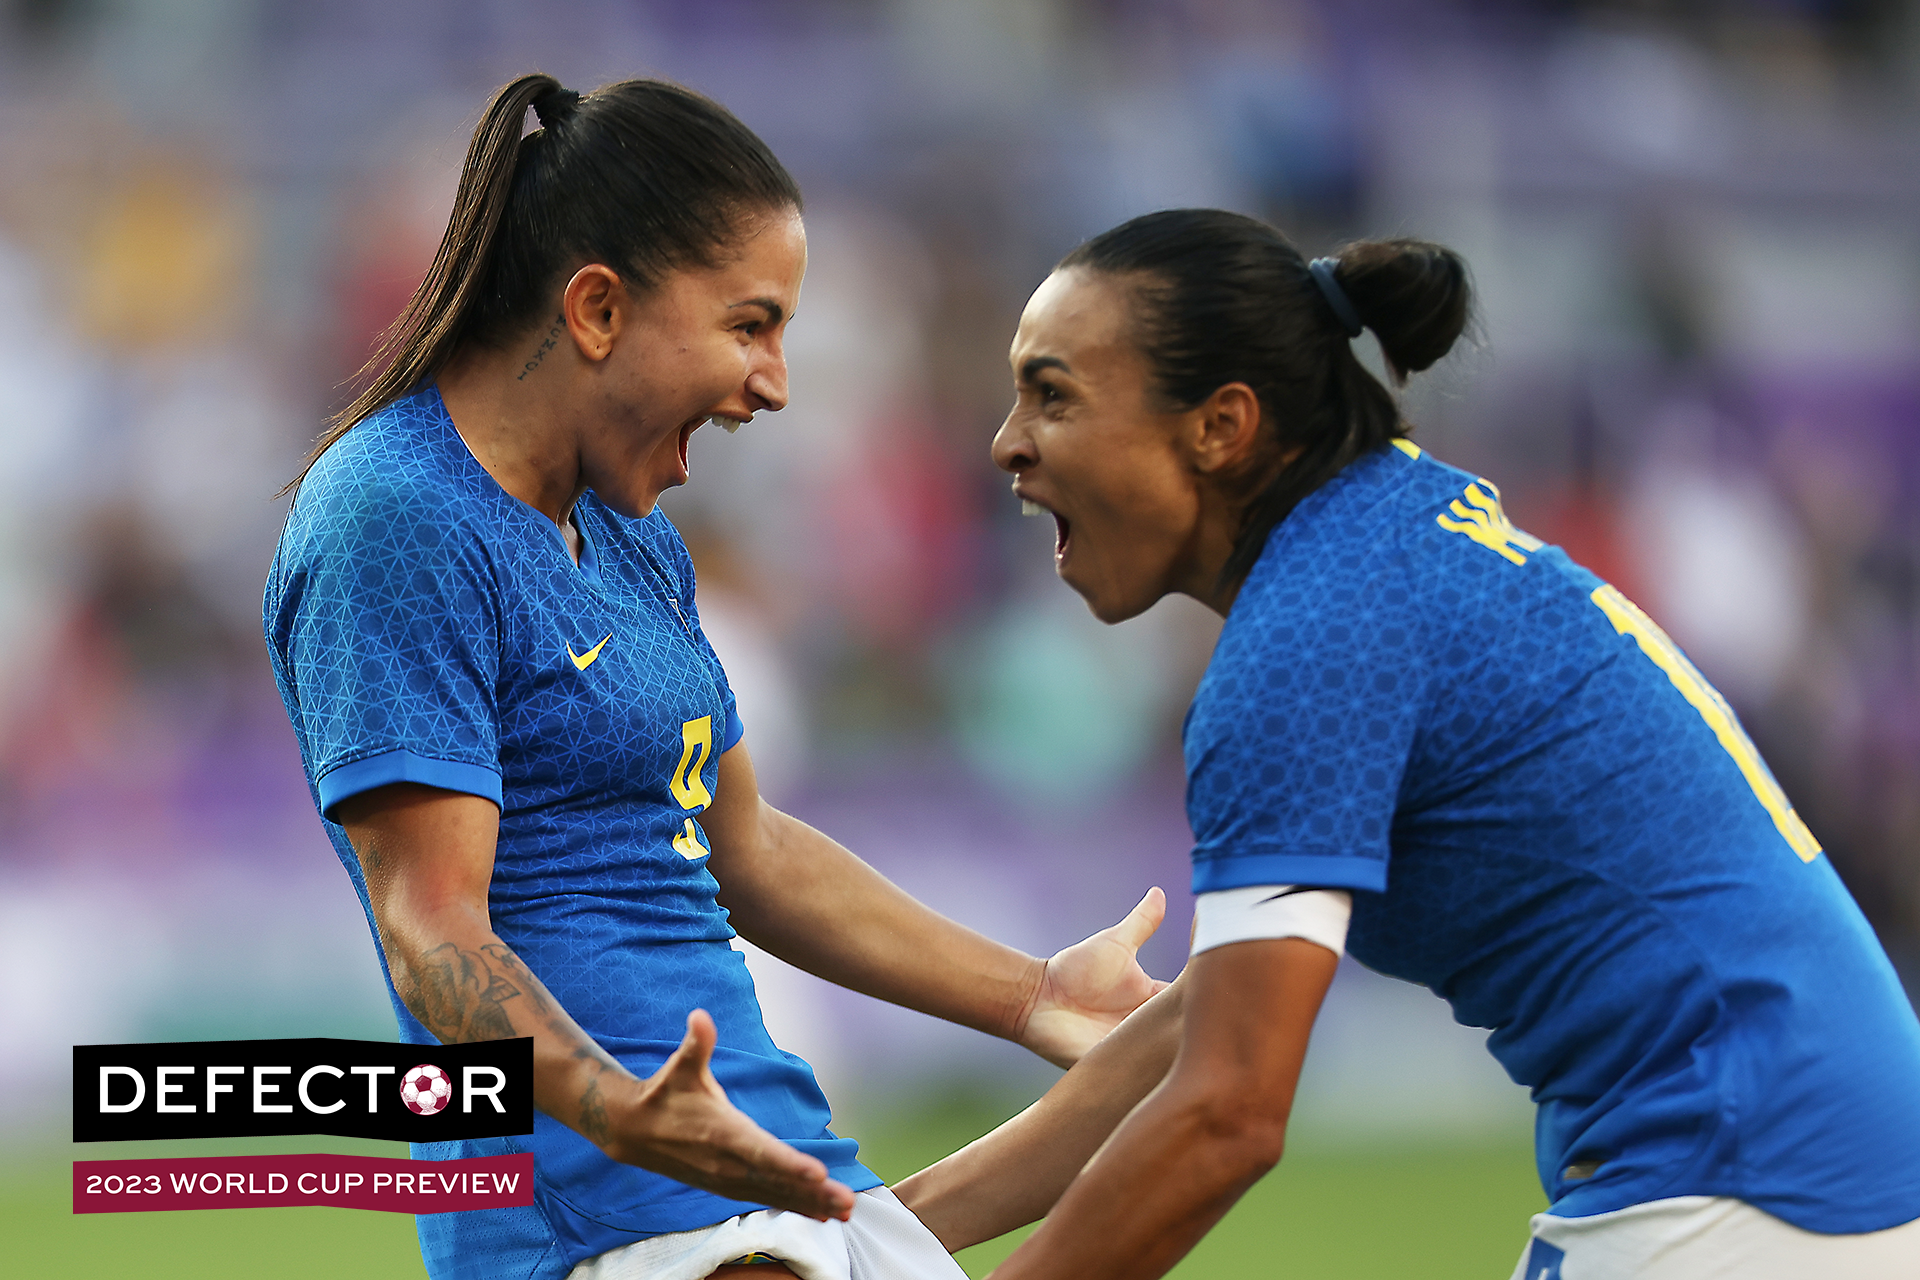 Debinha #9 celebrates with her teammate Marta #10 of Brazil after scores 1st goal during the match between Japan and Brazil at Exploria Stadium on February 16, 2023 in Orlando, Florida.